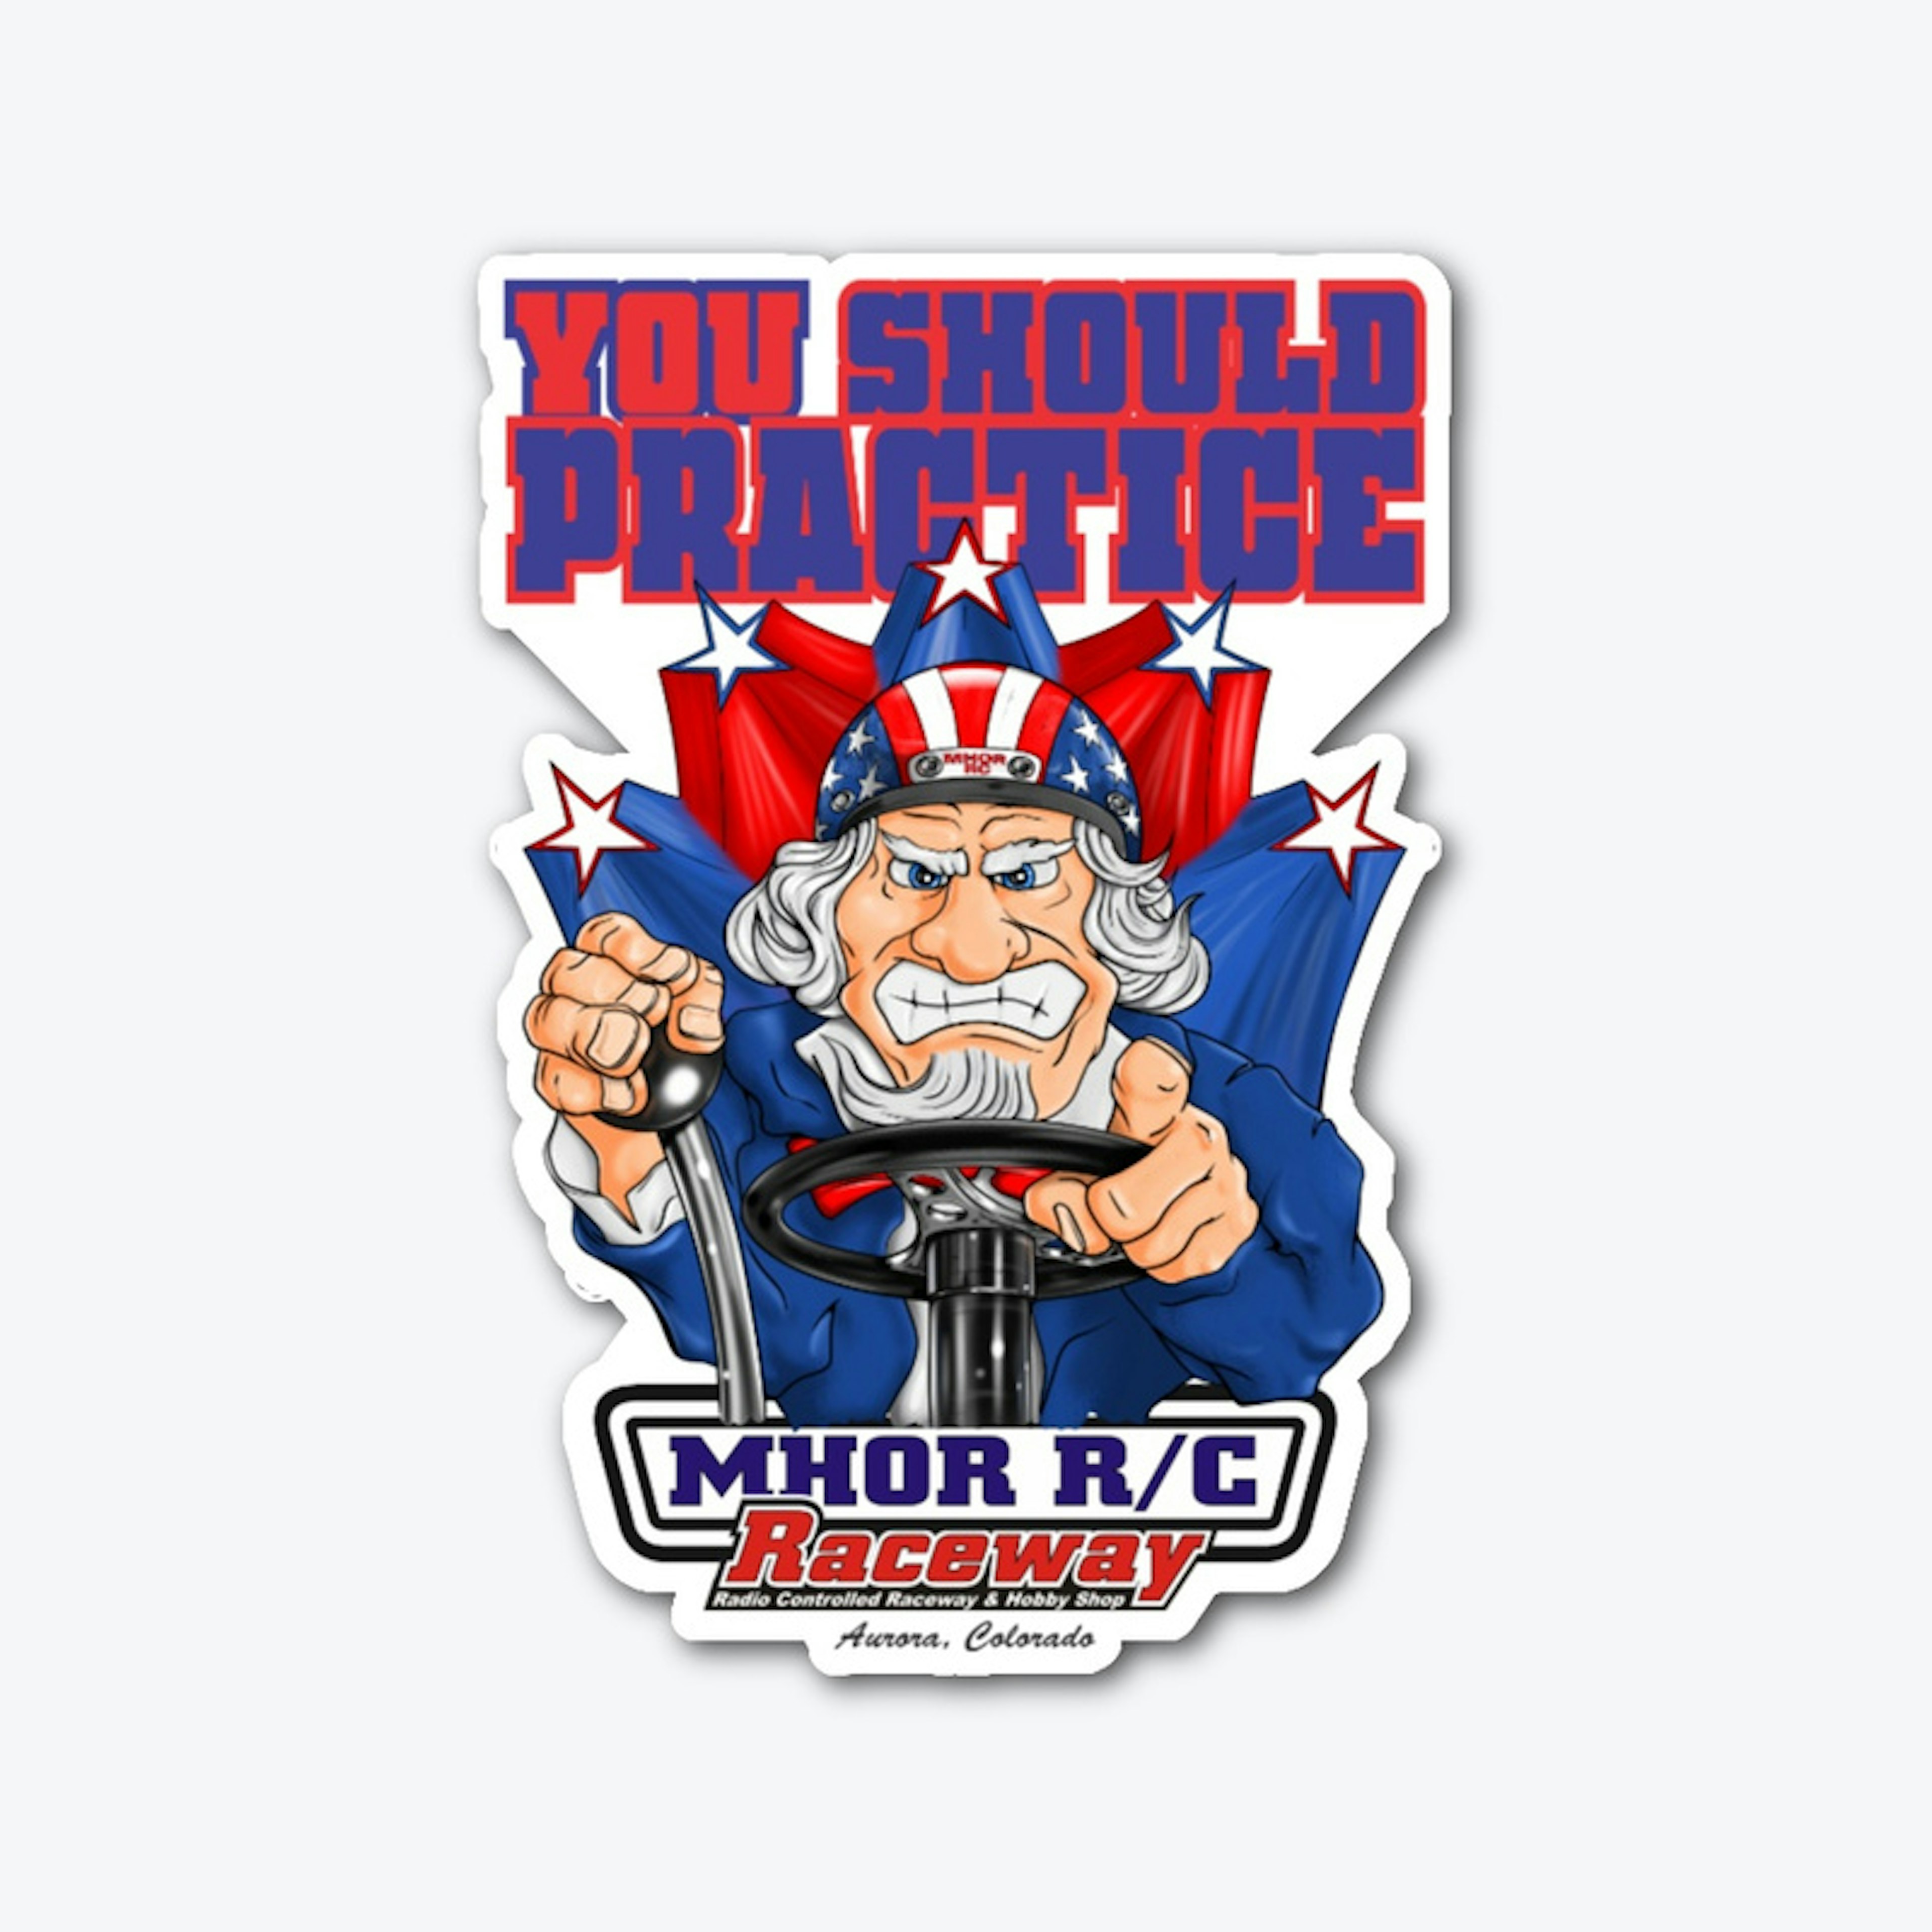 You Should Practice MHOR! - Uncle Sam